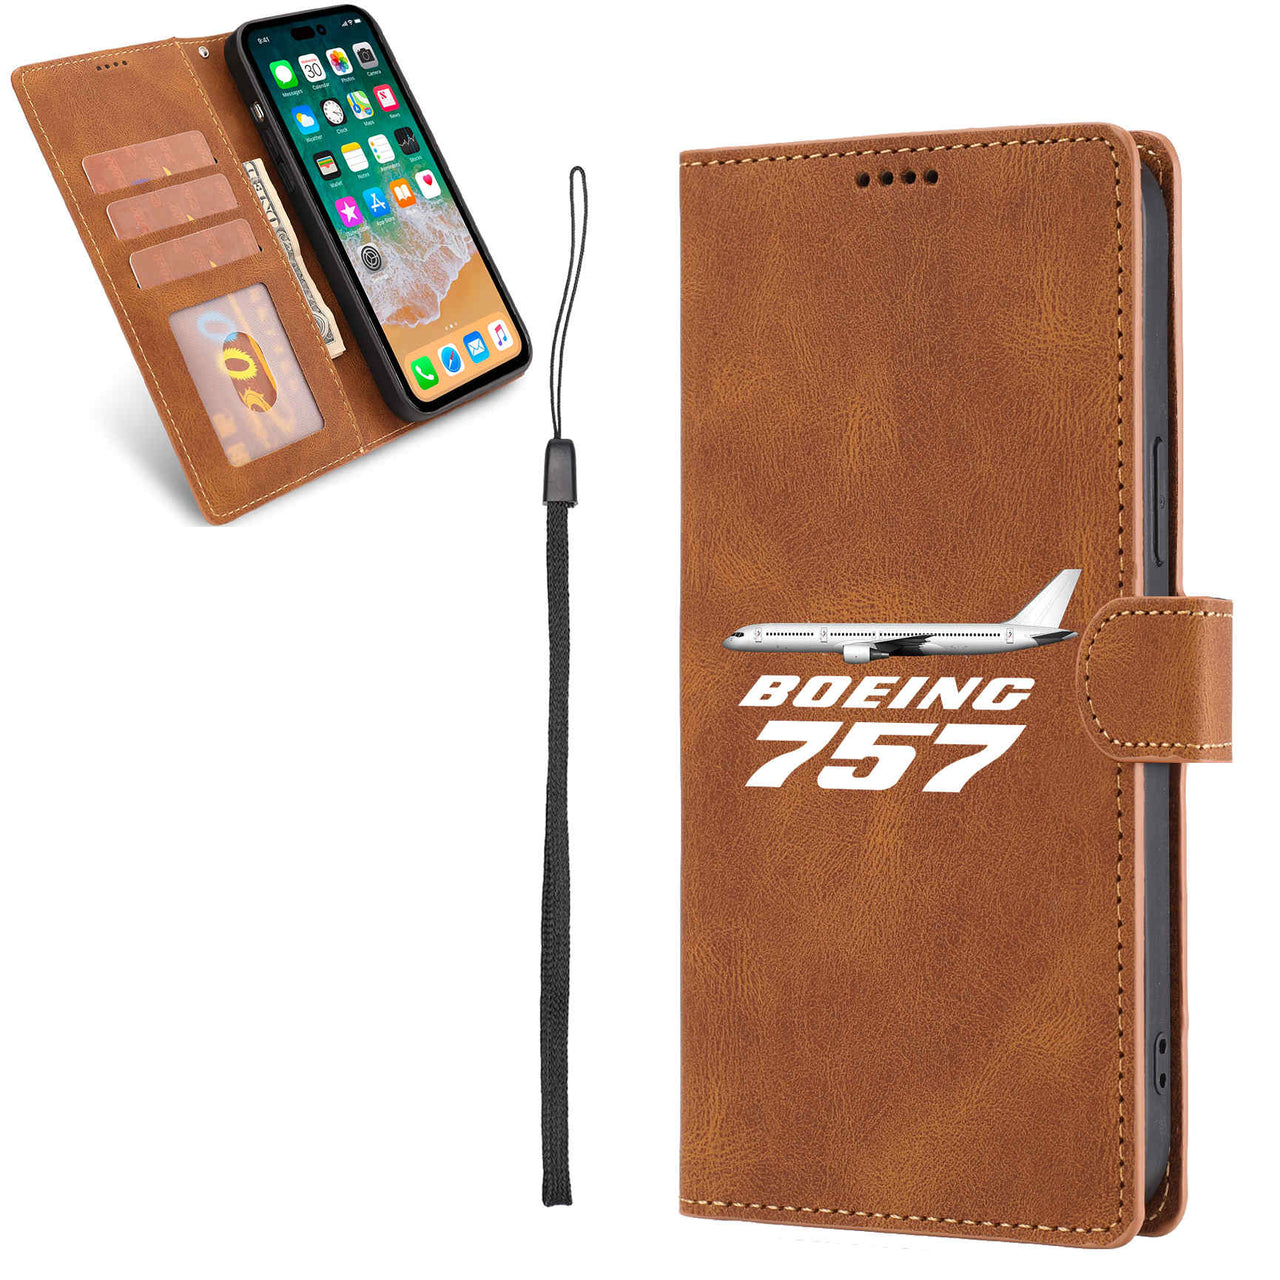 The Boeing 757 Leather Samsung A Cases